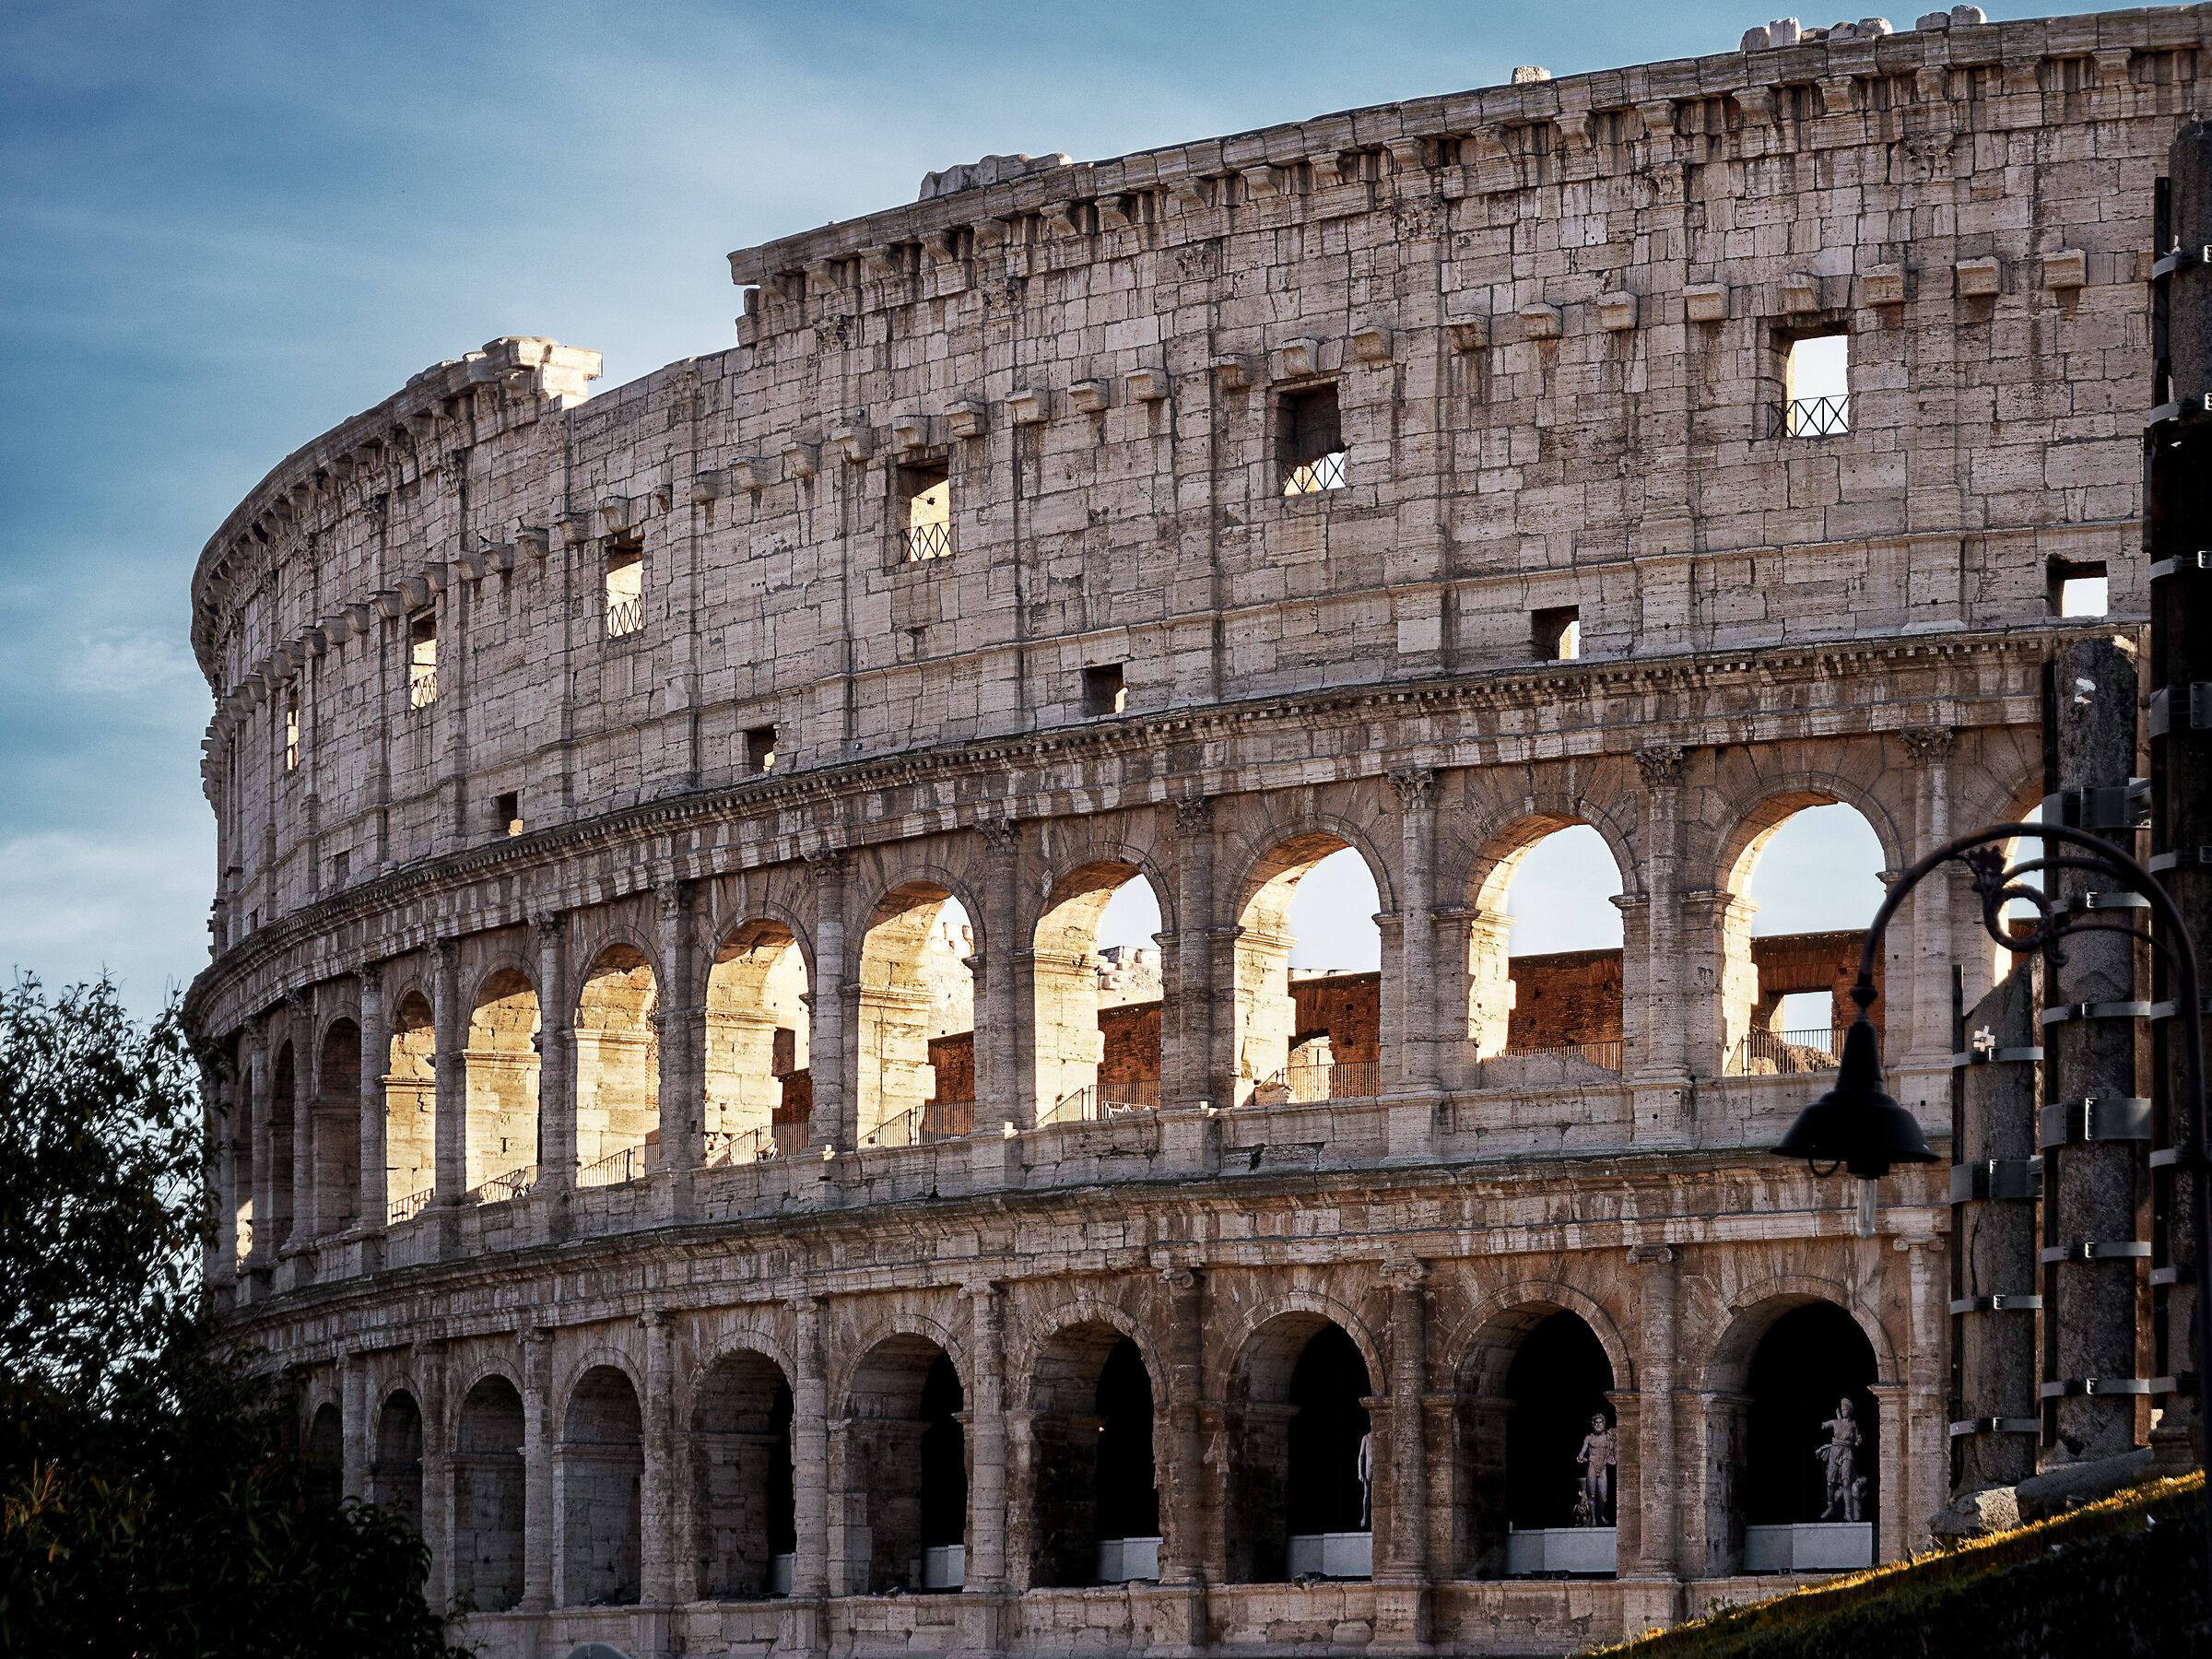 The Old Colosseum...